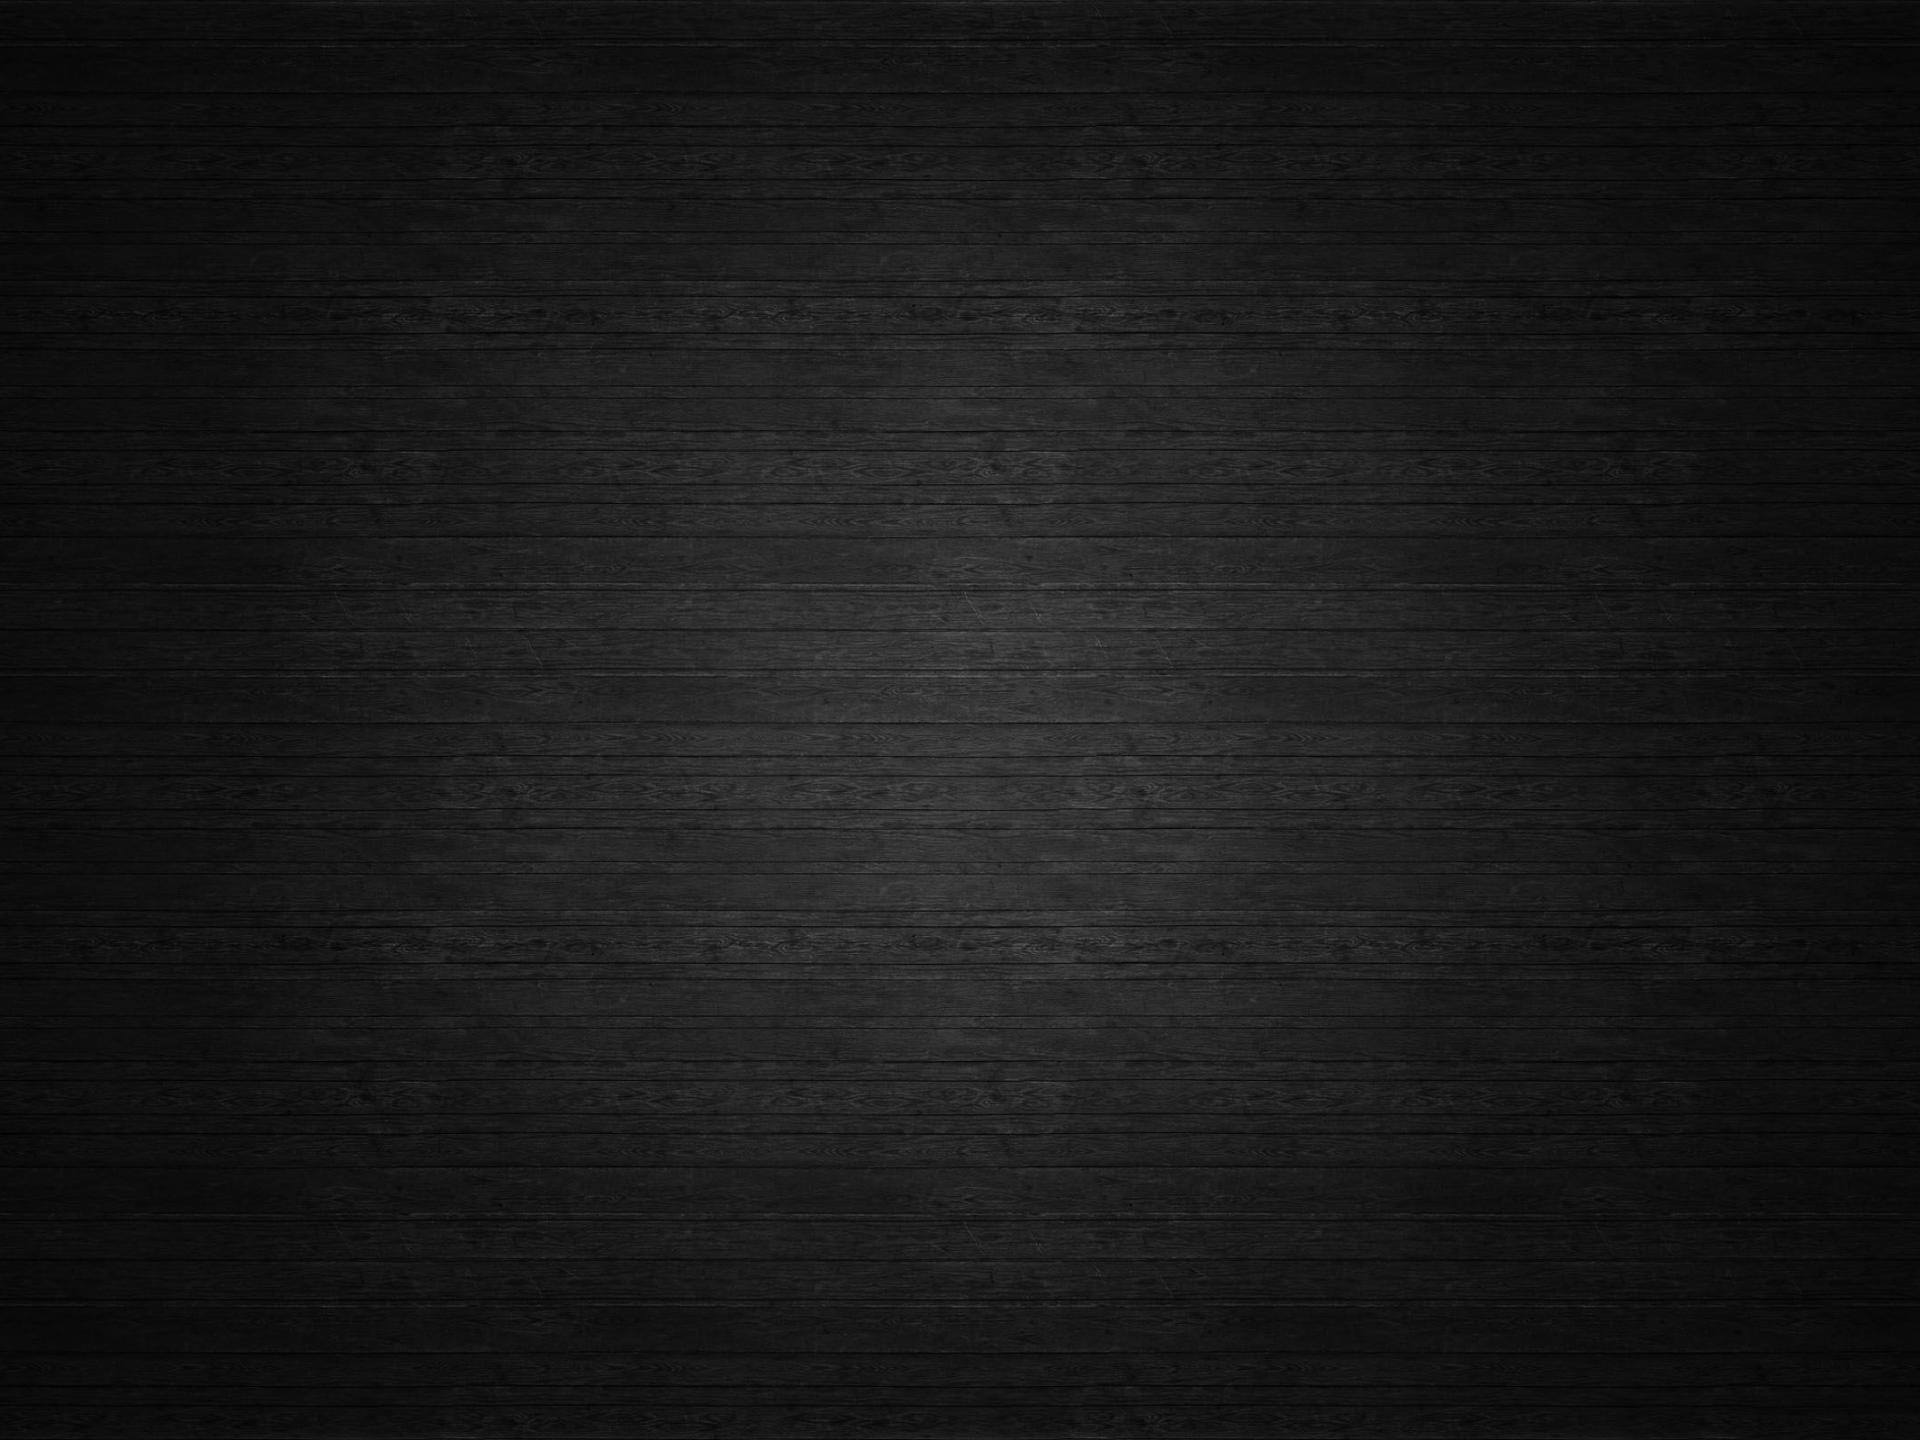 Black Background Wood 01 Abstract Wallpapers Black Background Wood 01